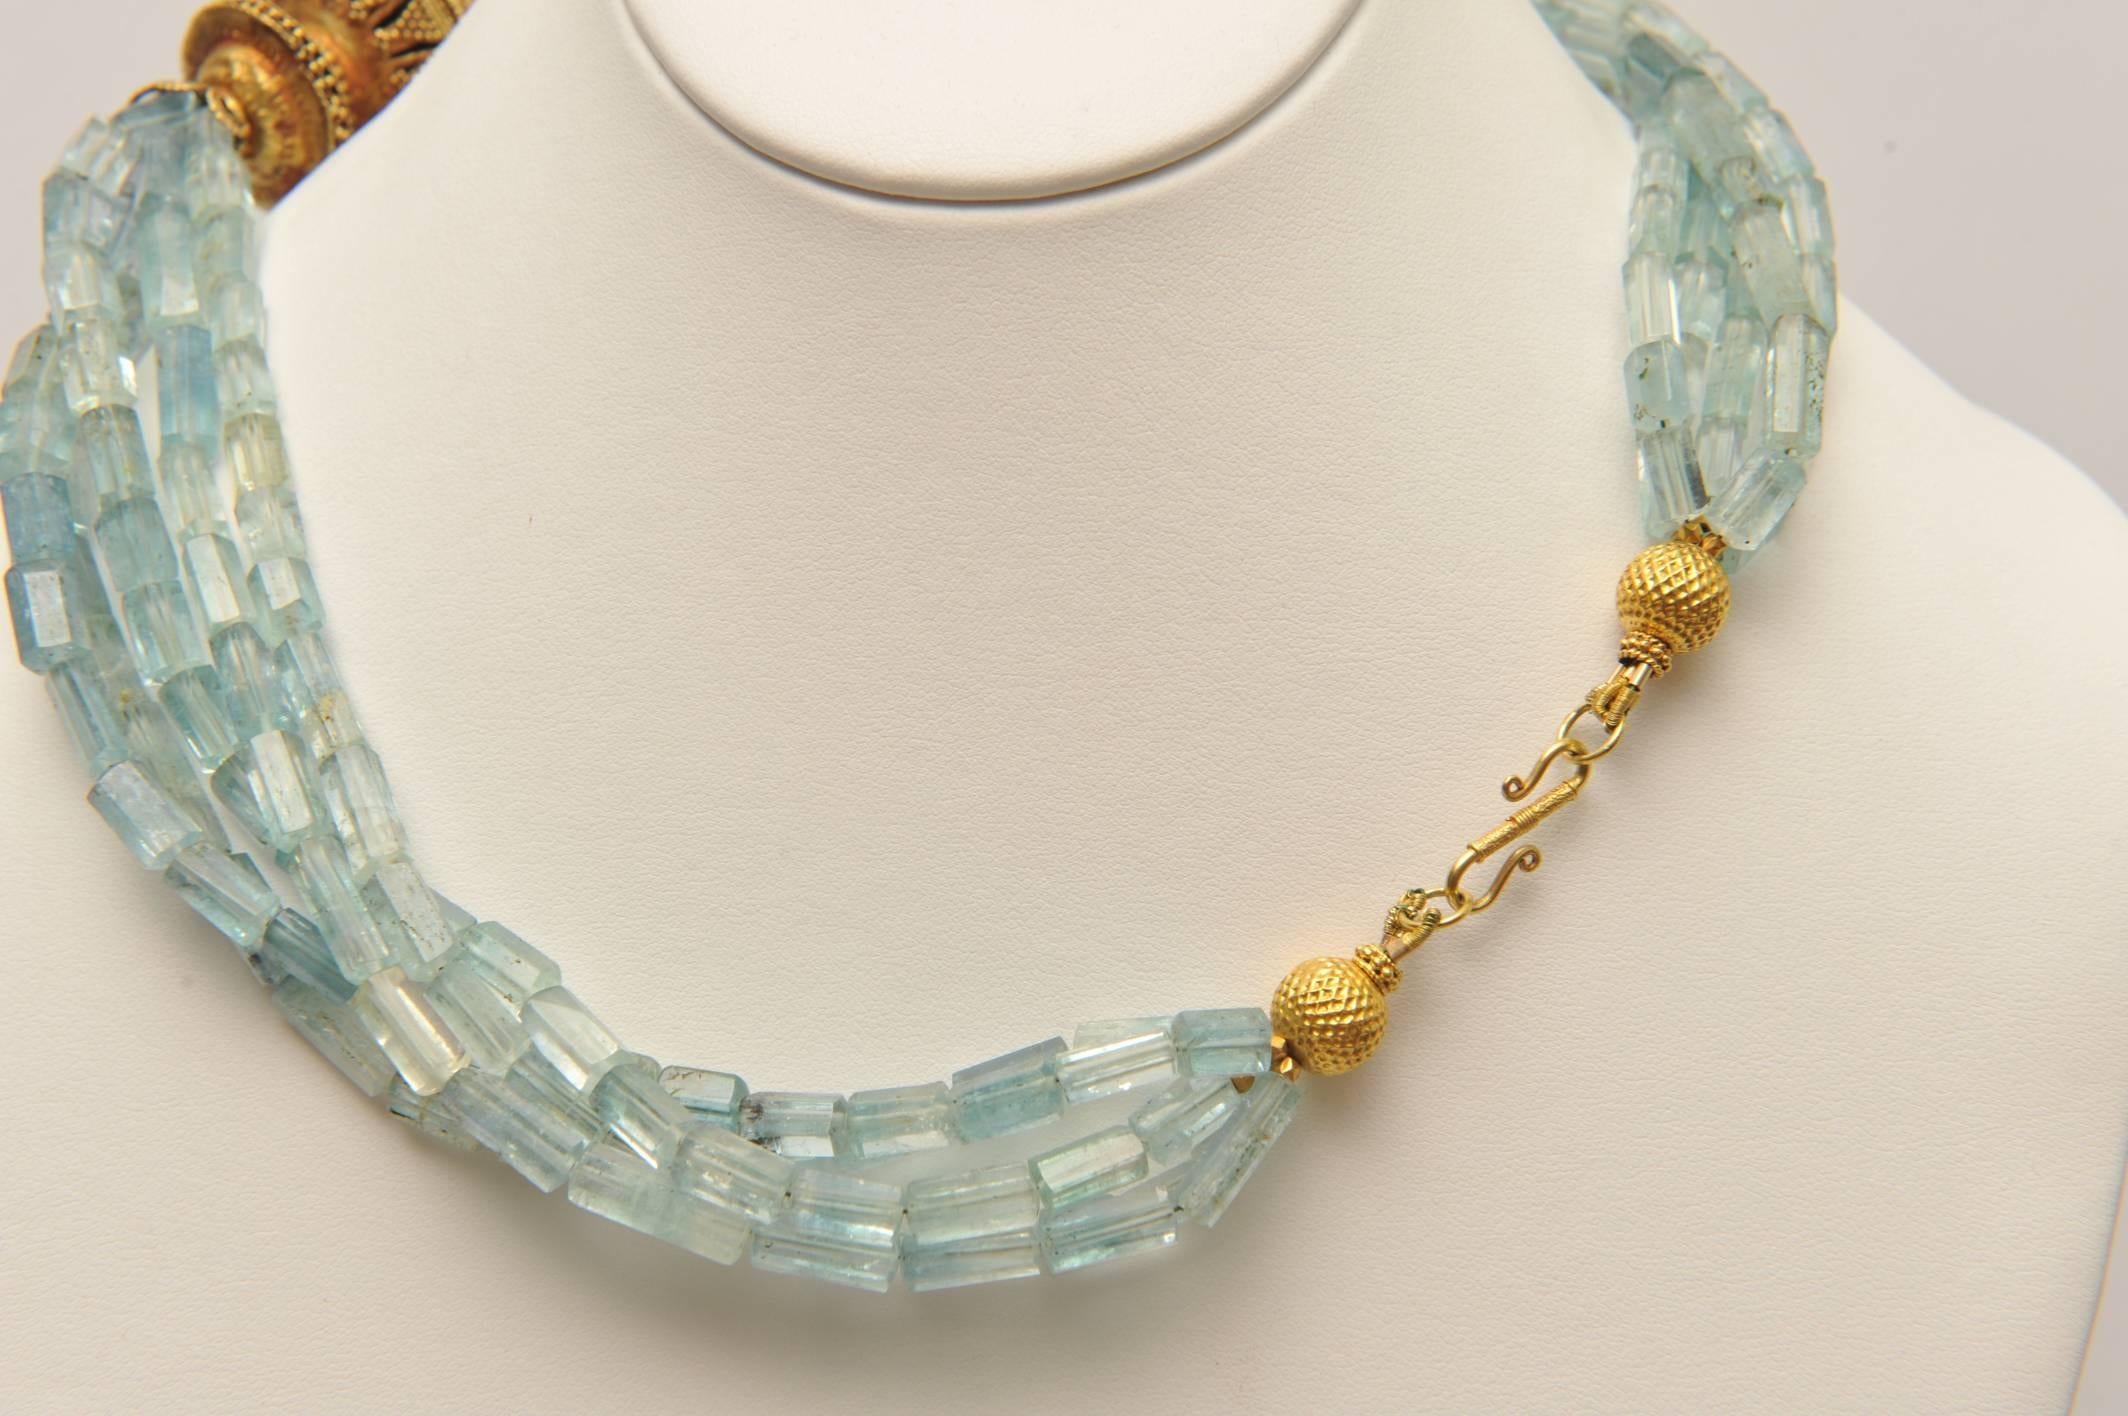 A rare and unusual multi-strand necklace comprised of faceted tubular shaped aquamarine beads with beautiful blue and green clarity, coupled with an exquisite old, 22K gold bead with fine granulation work and detail.  One of a kind designs by